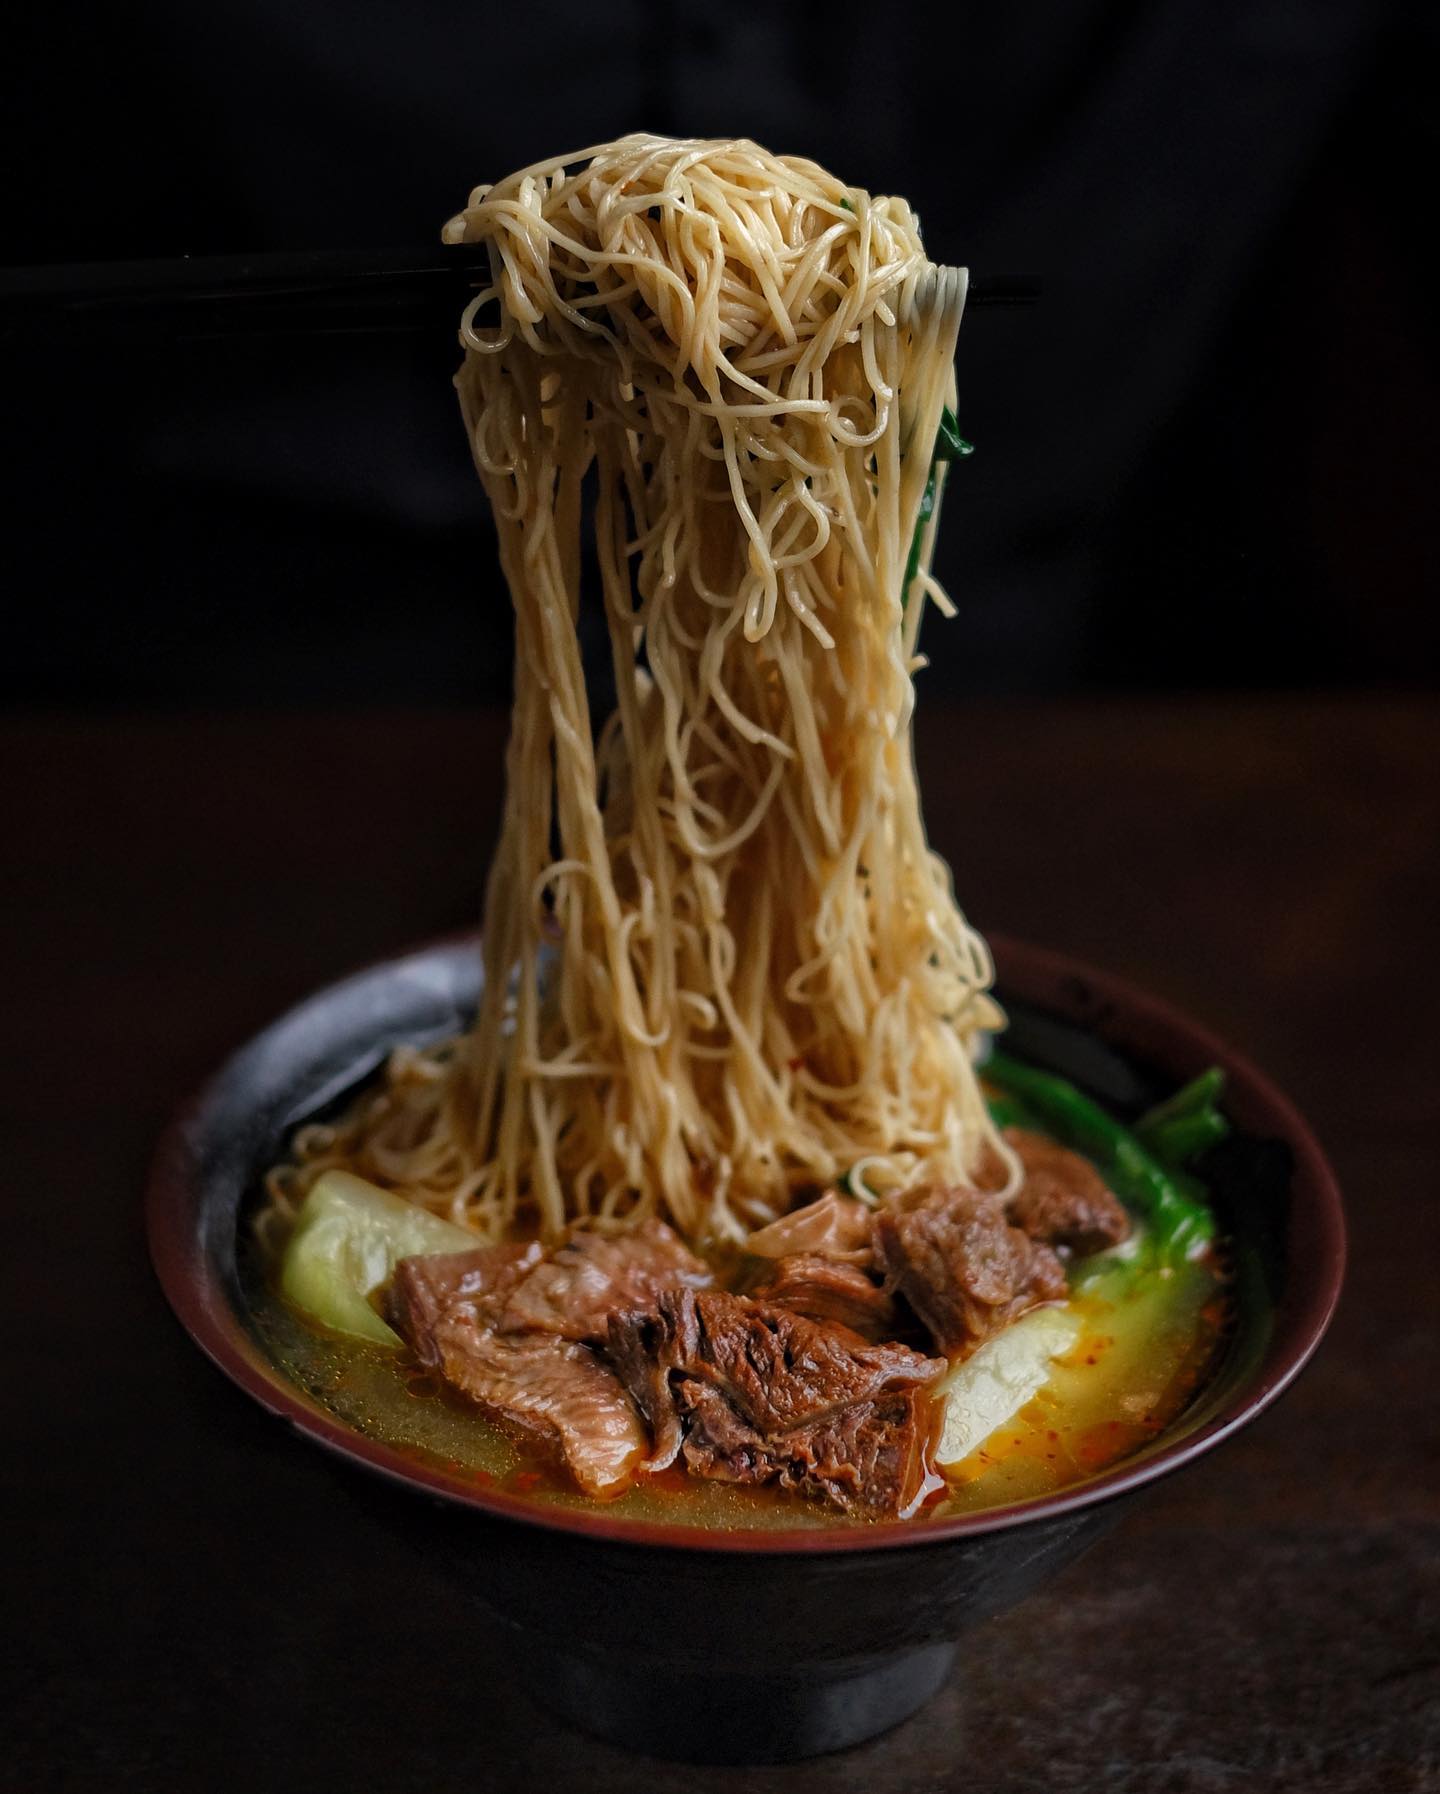 The beef noodle soup at Jade